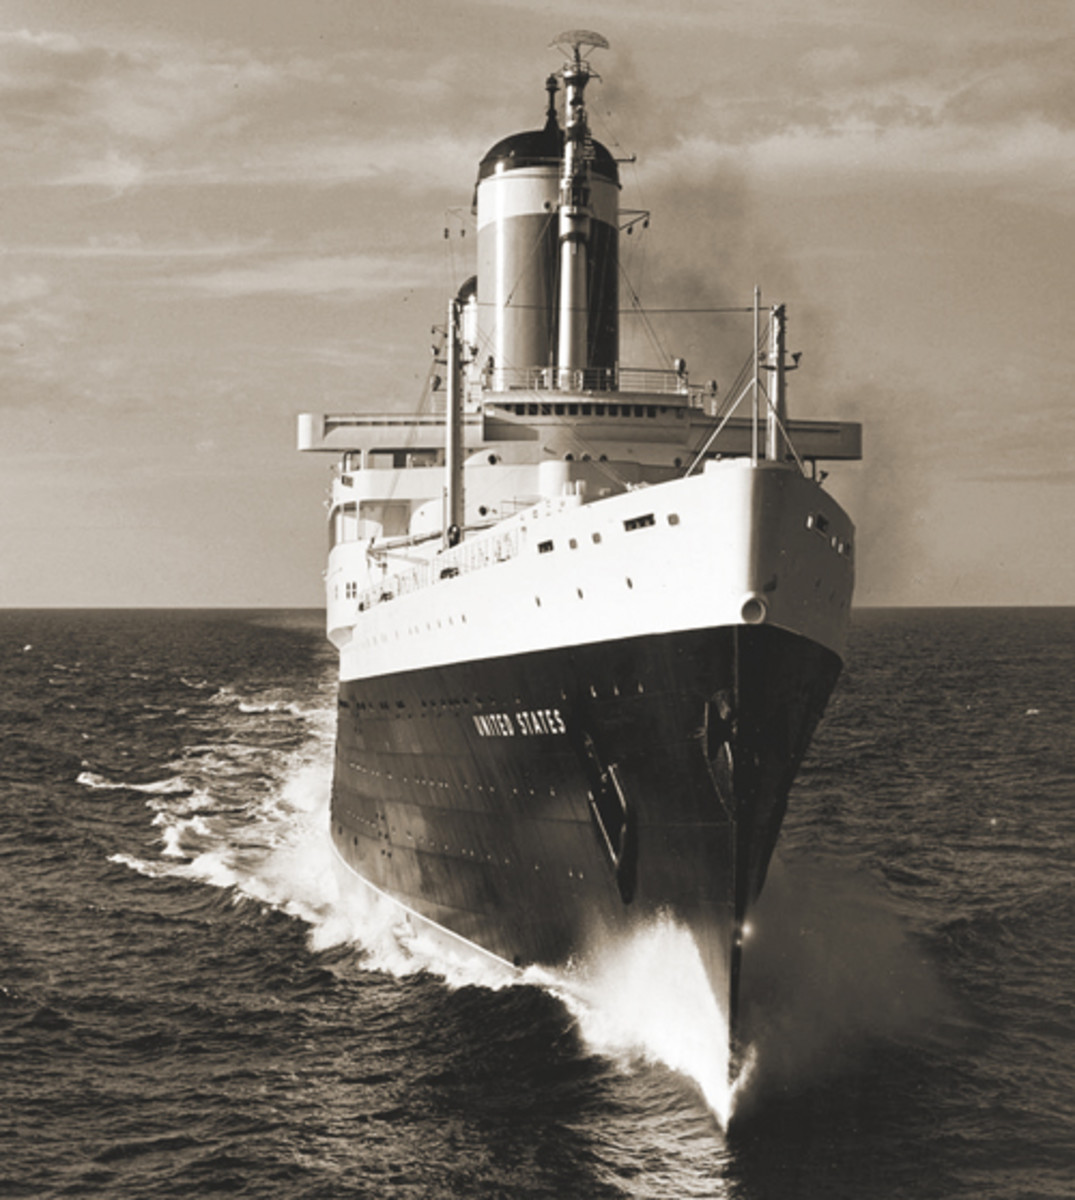 Built for speed, the SS United States still holds the Blue Riband for fastest westbound Atlantic crossing by a ship in regular passenger service.